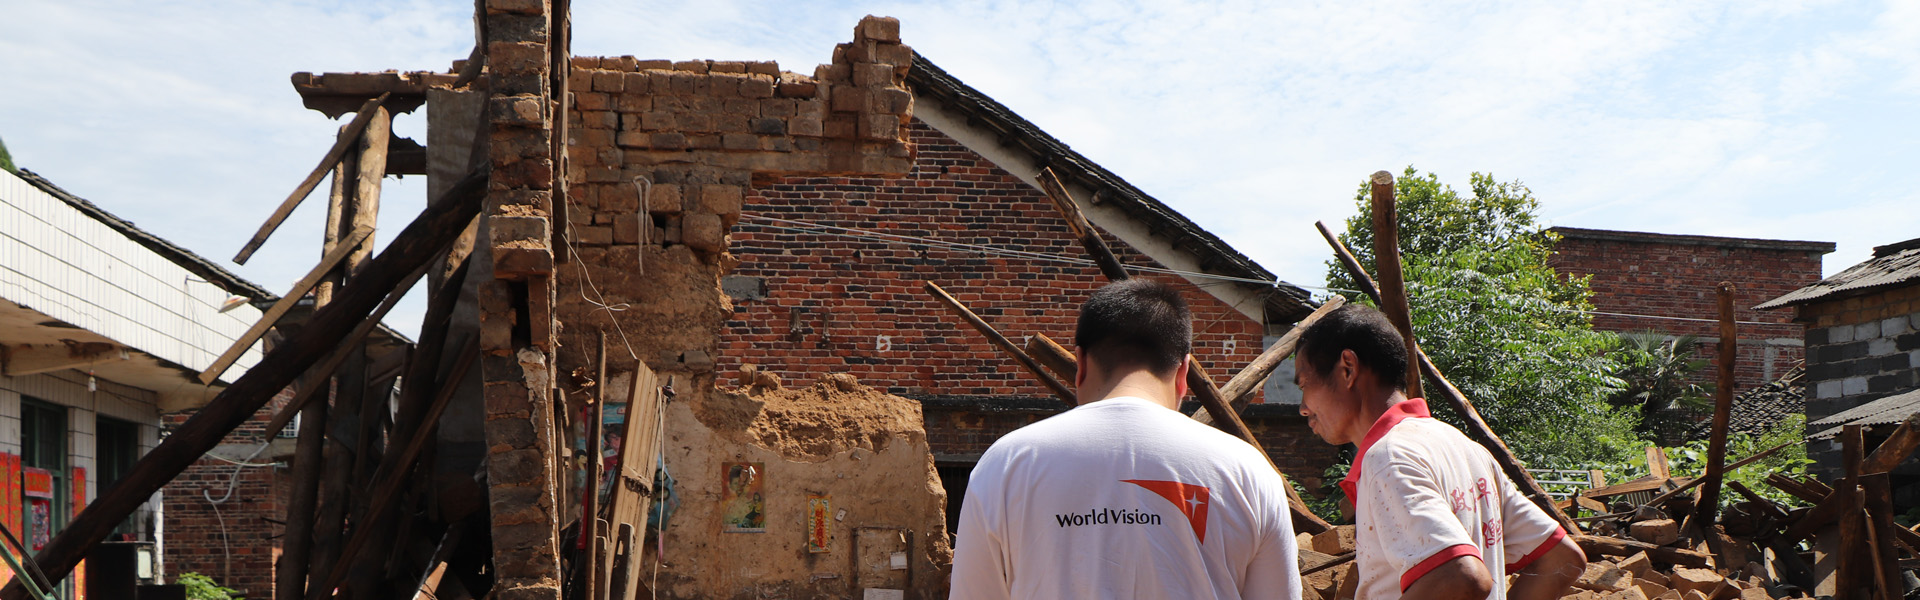 A man wearing a white t-shirt with a World Vision logo faces a building that has been reduced to rubble.